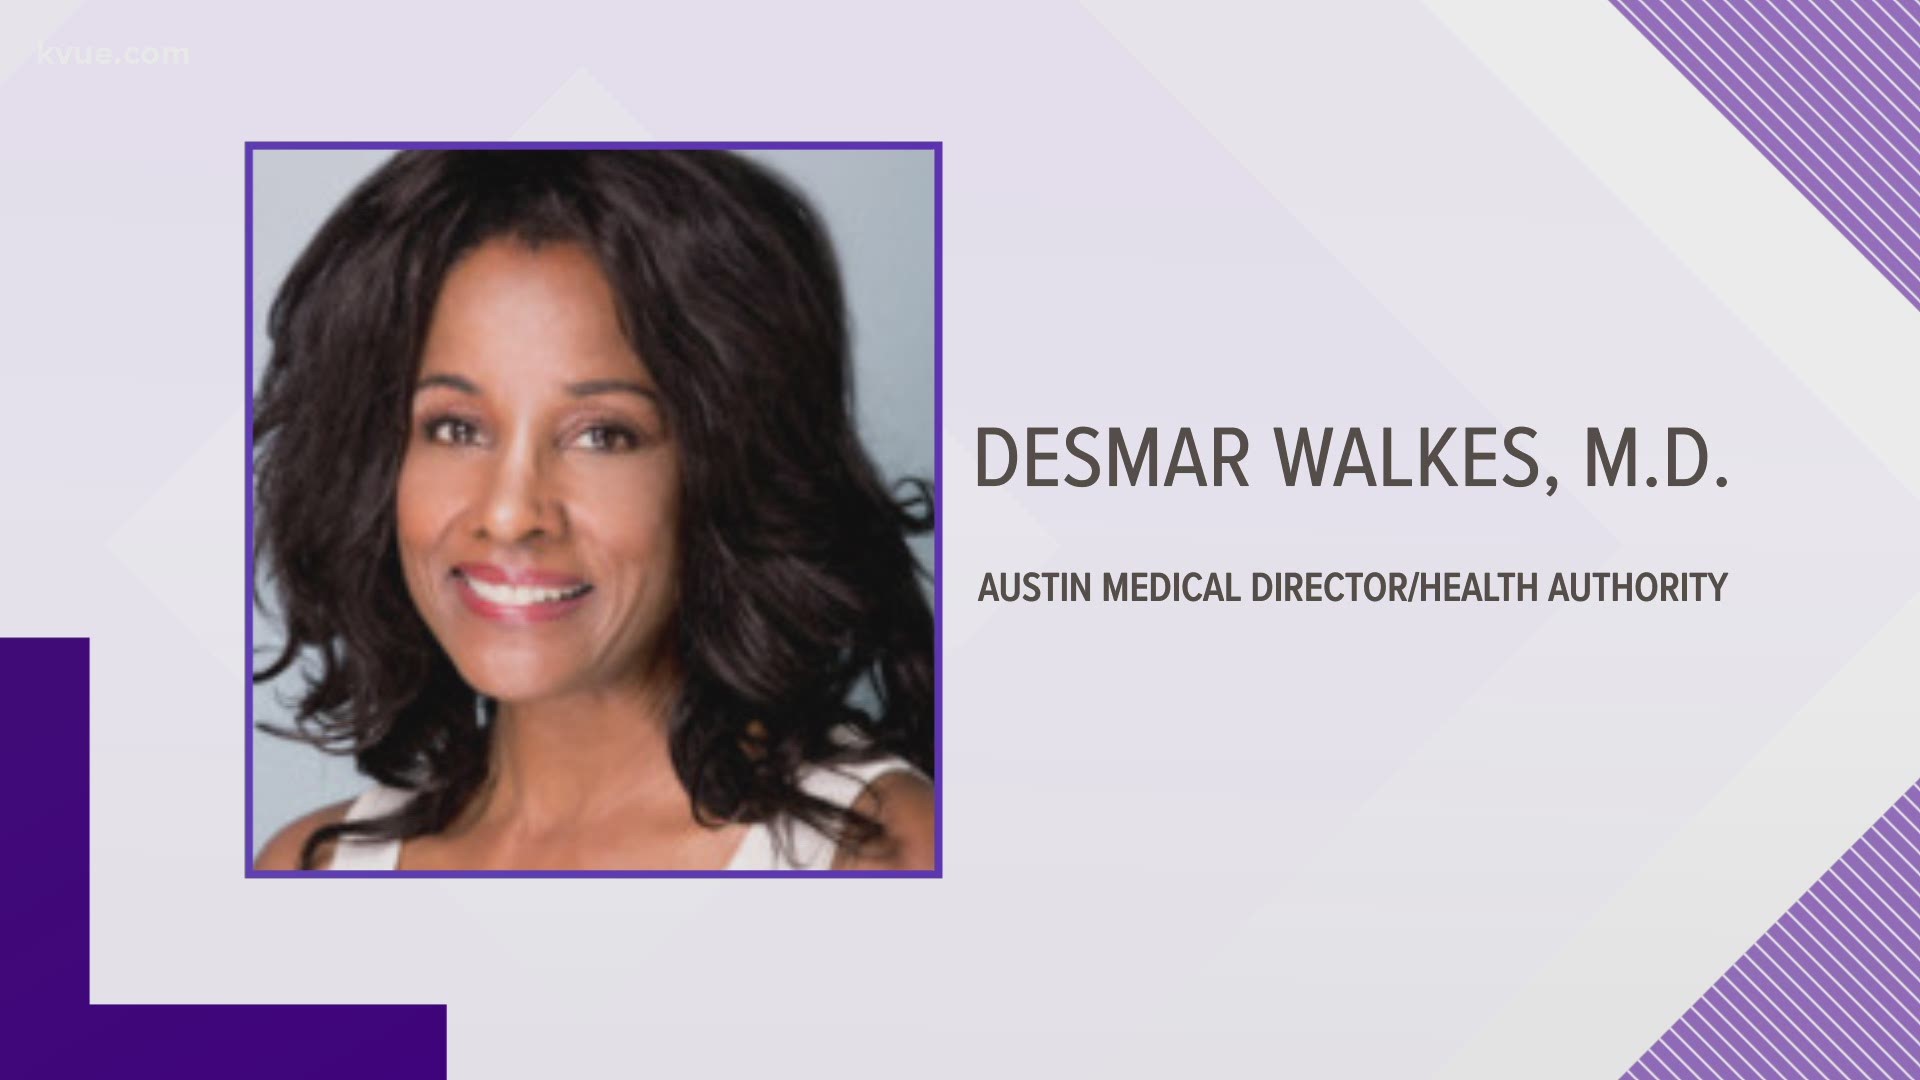 Dr. Desmar Walkes will replace Dr. Mark Escott, who has seen the area through the pandemic as interim director.